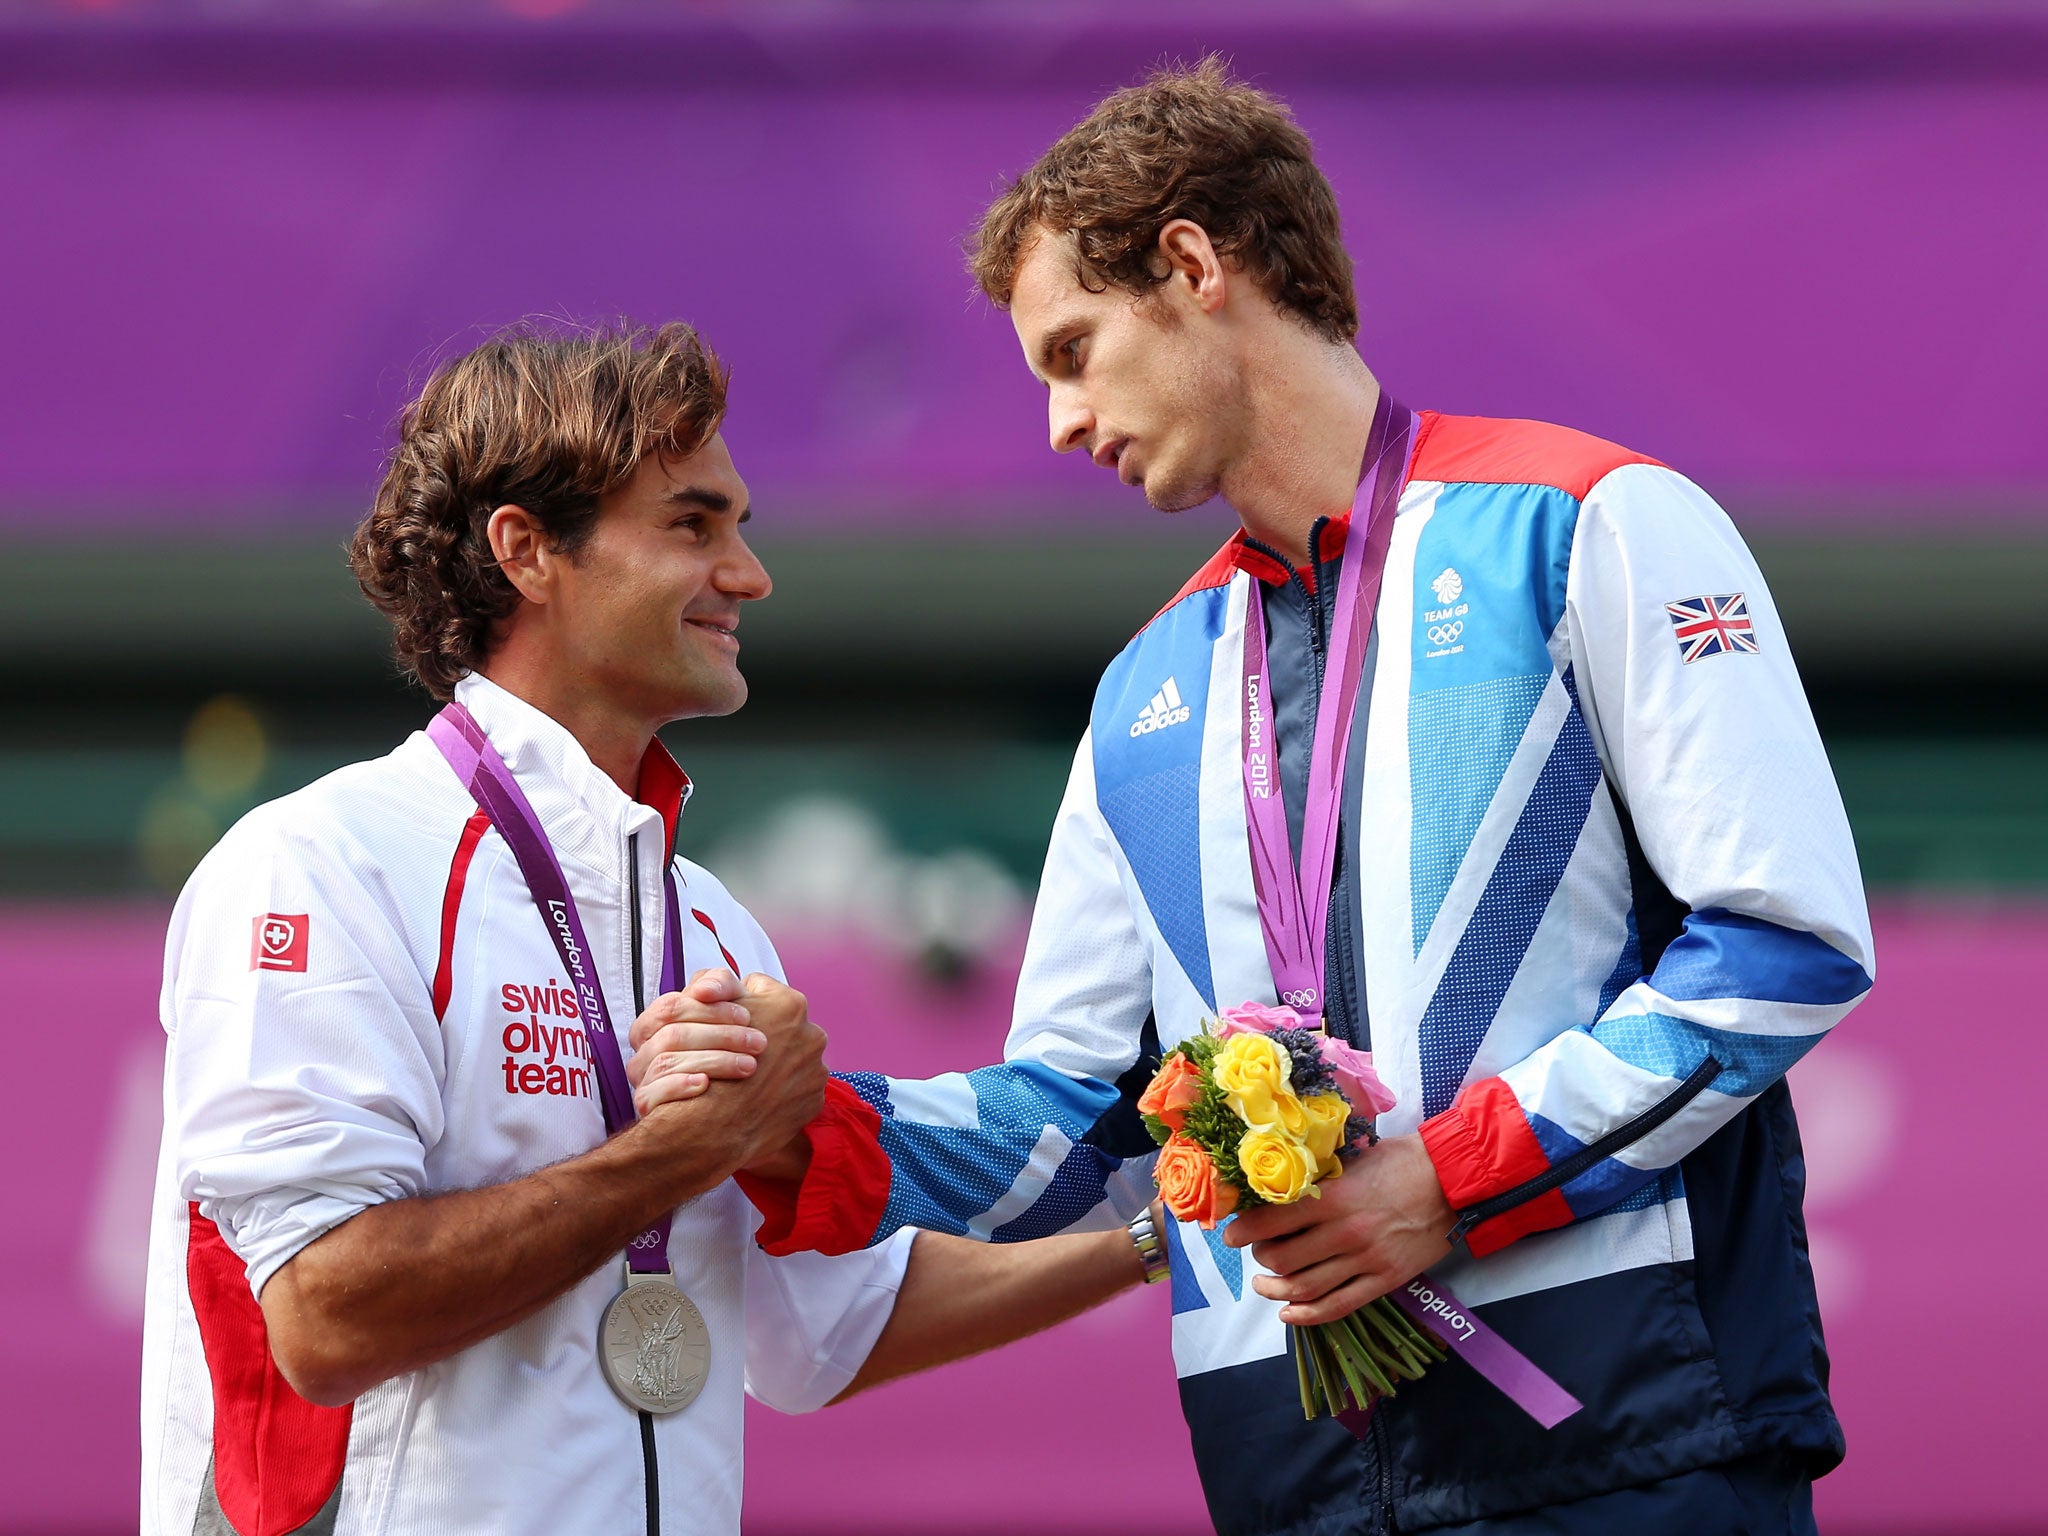 The Olympic final that Murray won last year